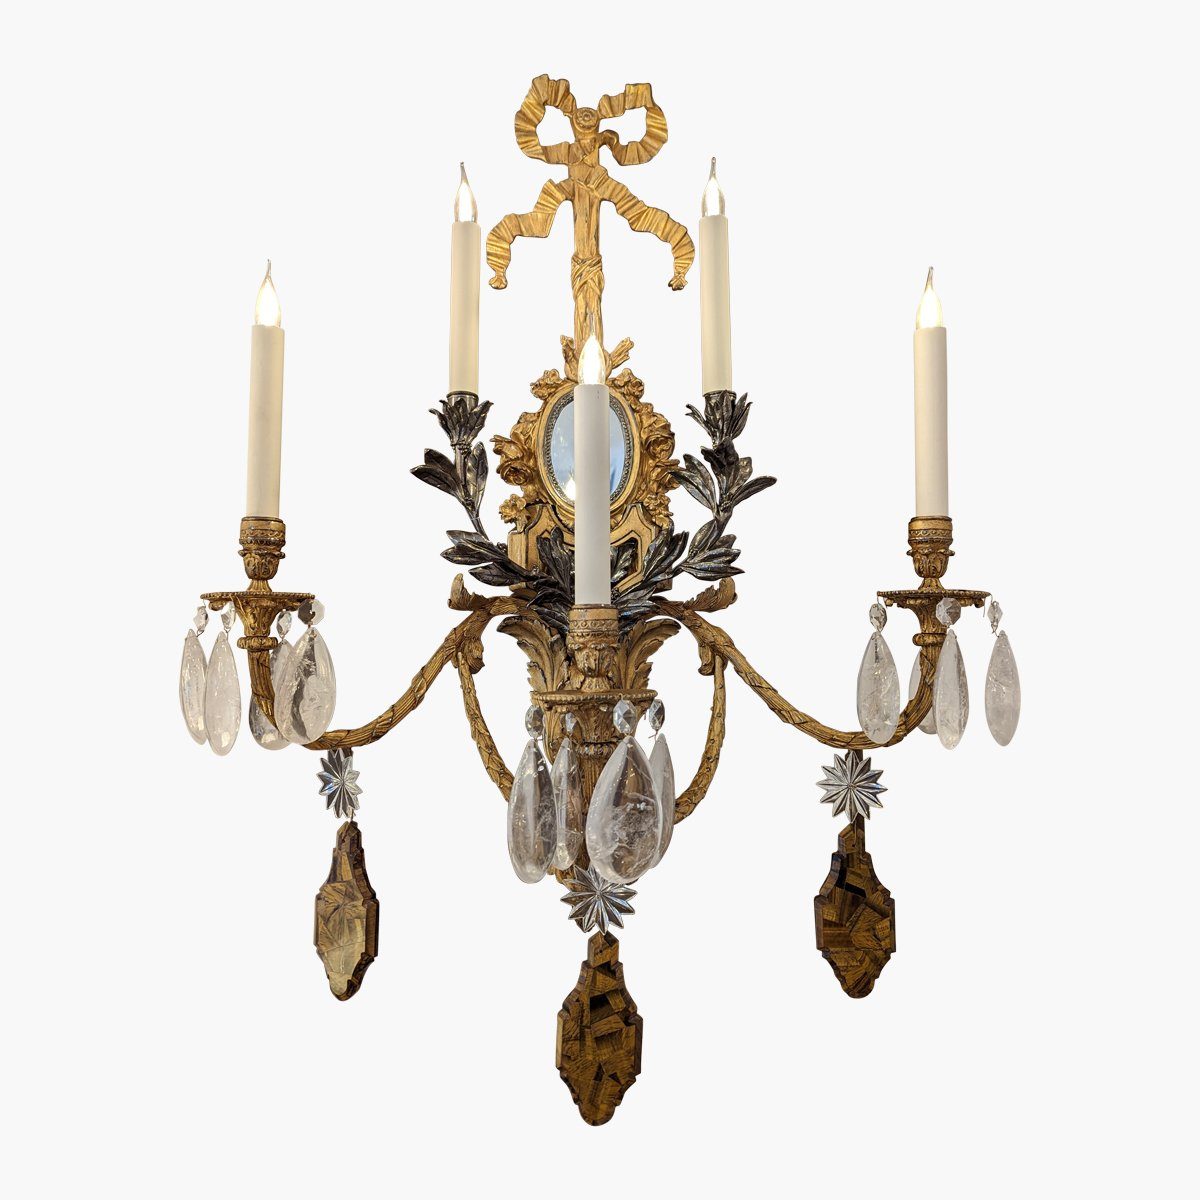 RAMBOUILLET-5 GOLD AND BLACK NICKEL SCONCE